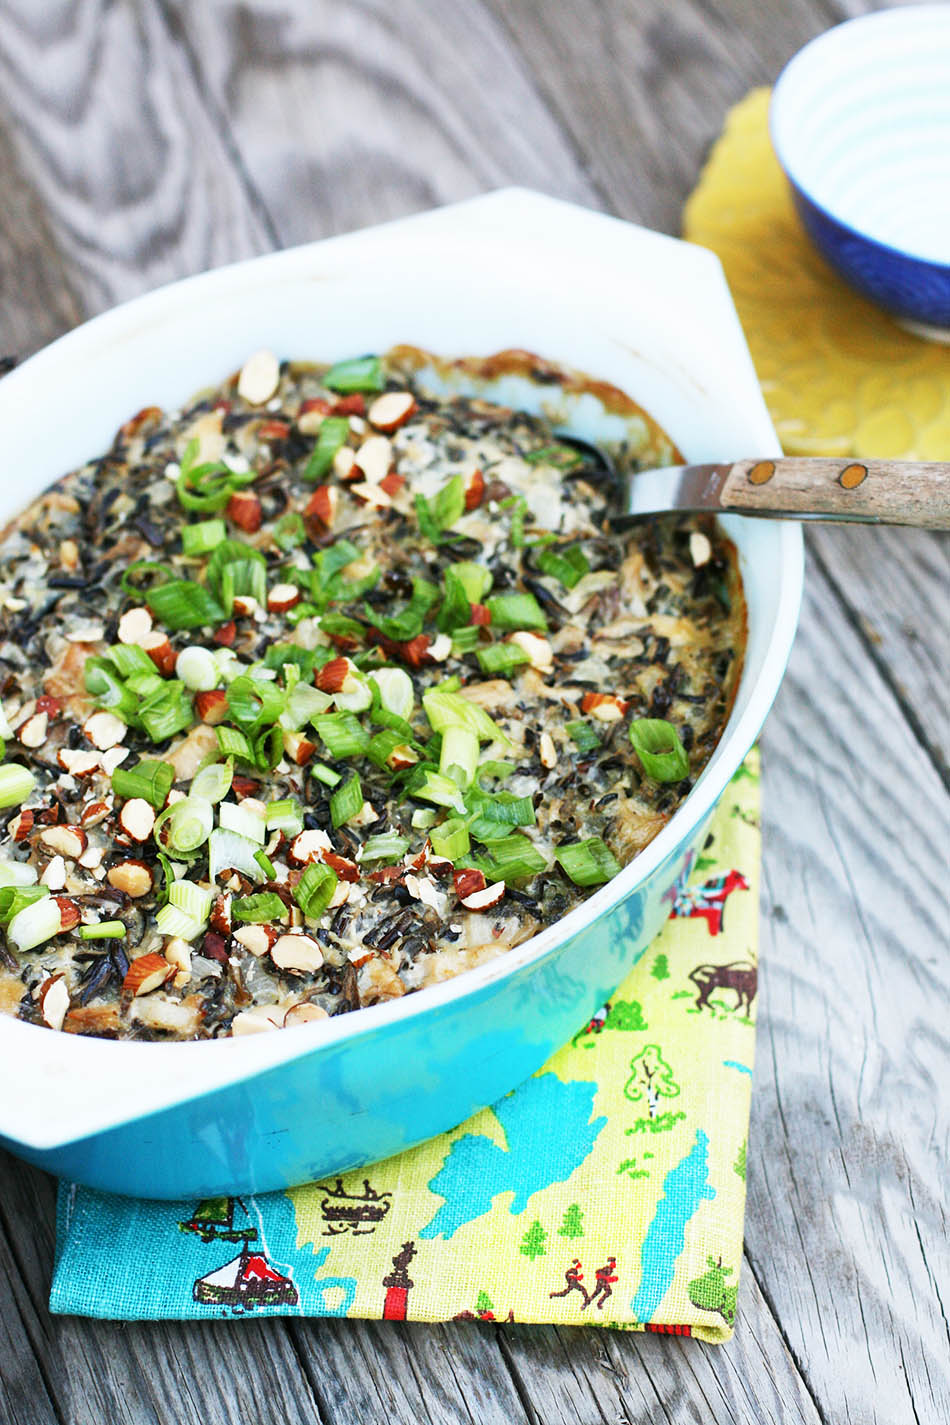 Wild rice hotdish: A hearty dish that makes the best use of delicious wild rice!